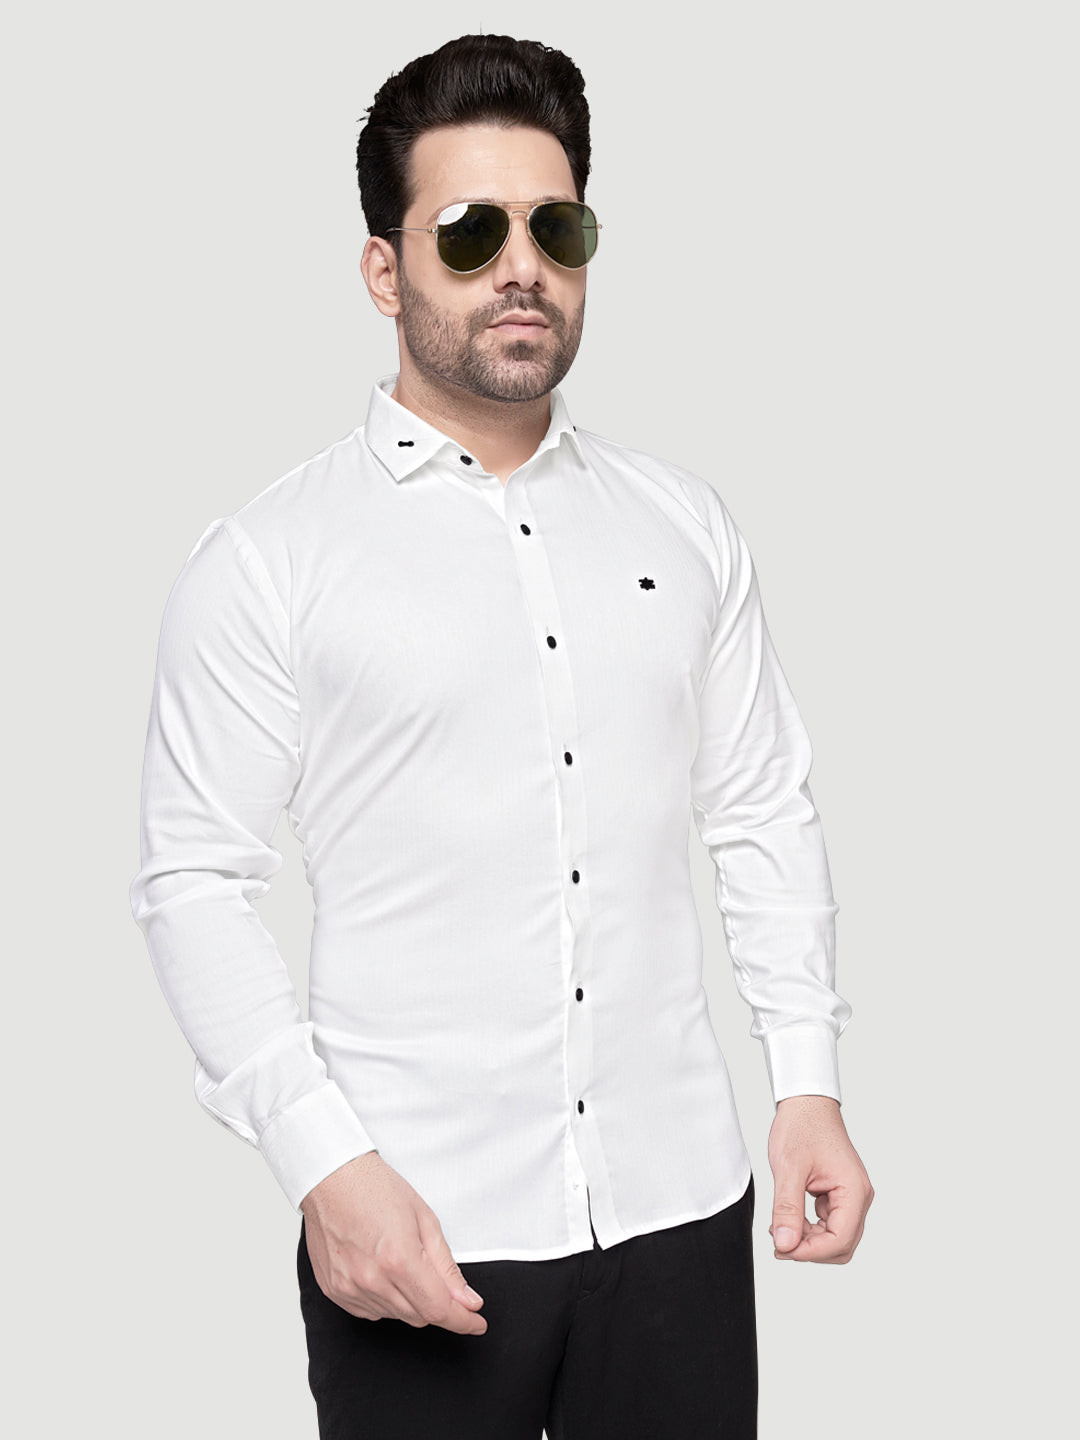 Black and White Designer Shirts with Collar Accessory & Metal Broach-7